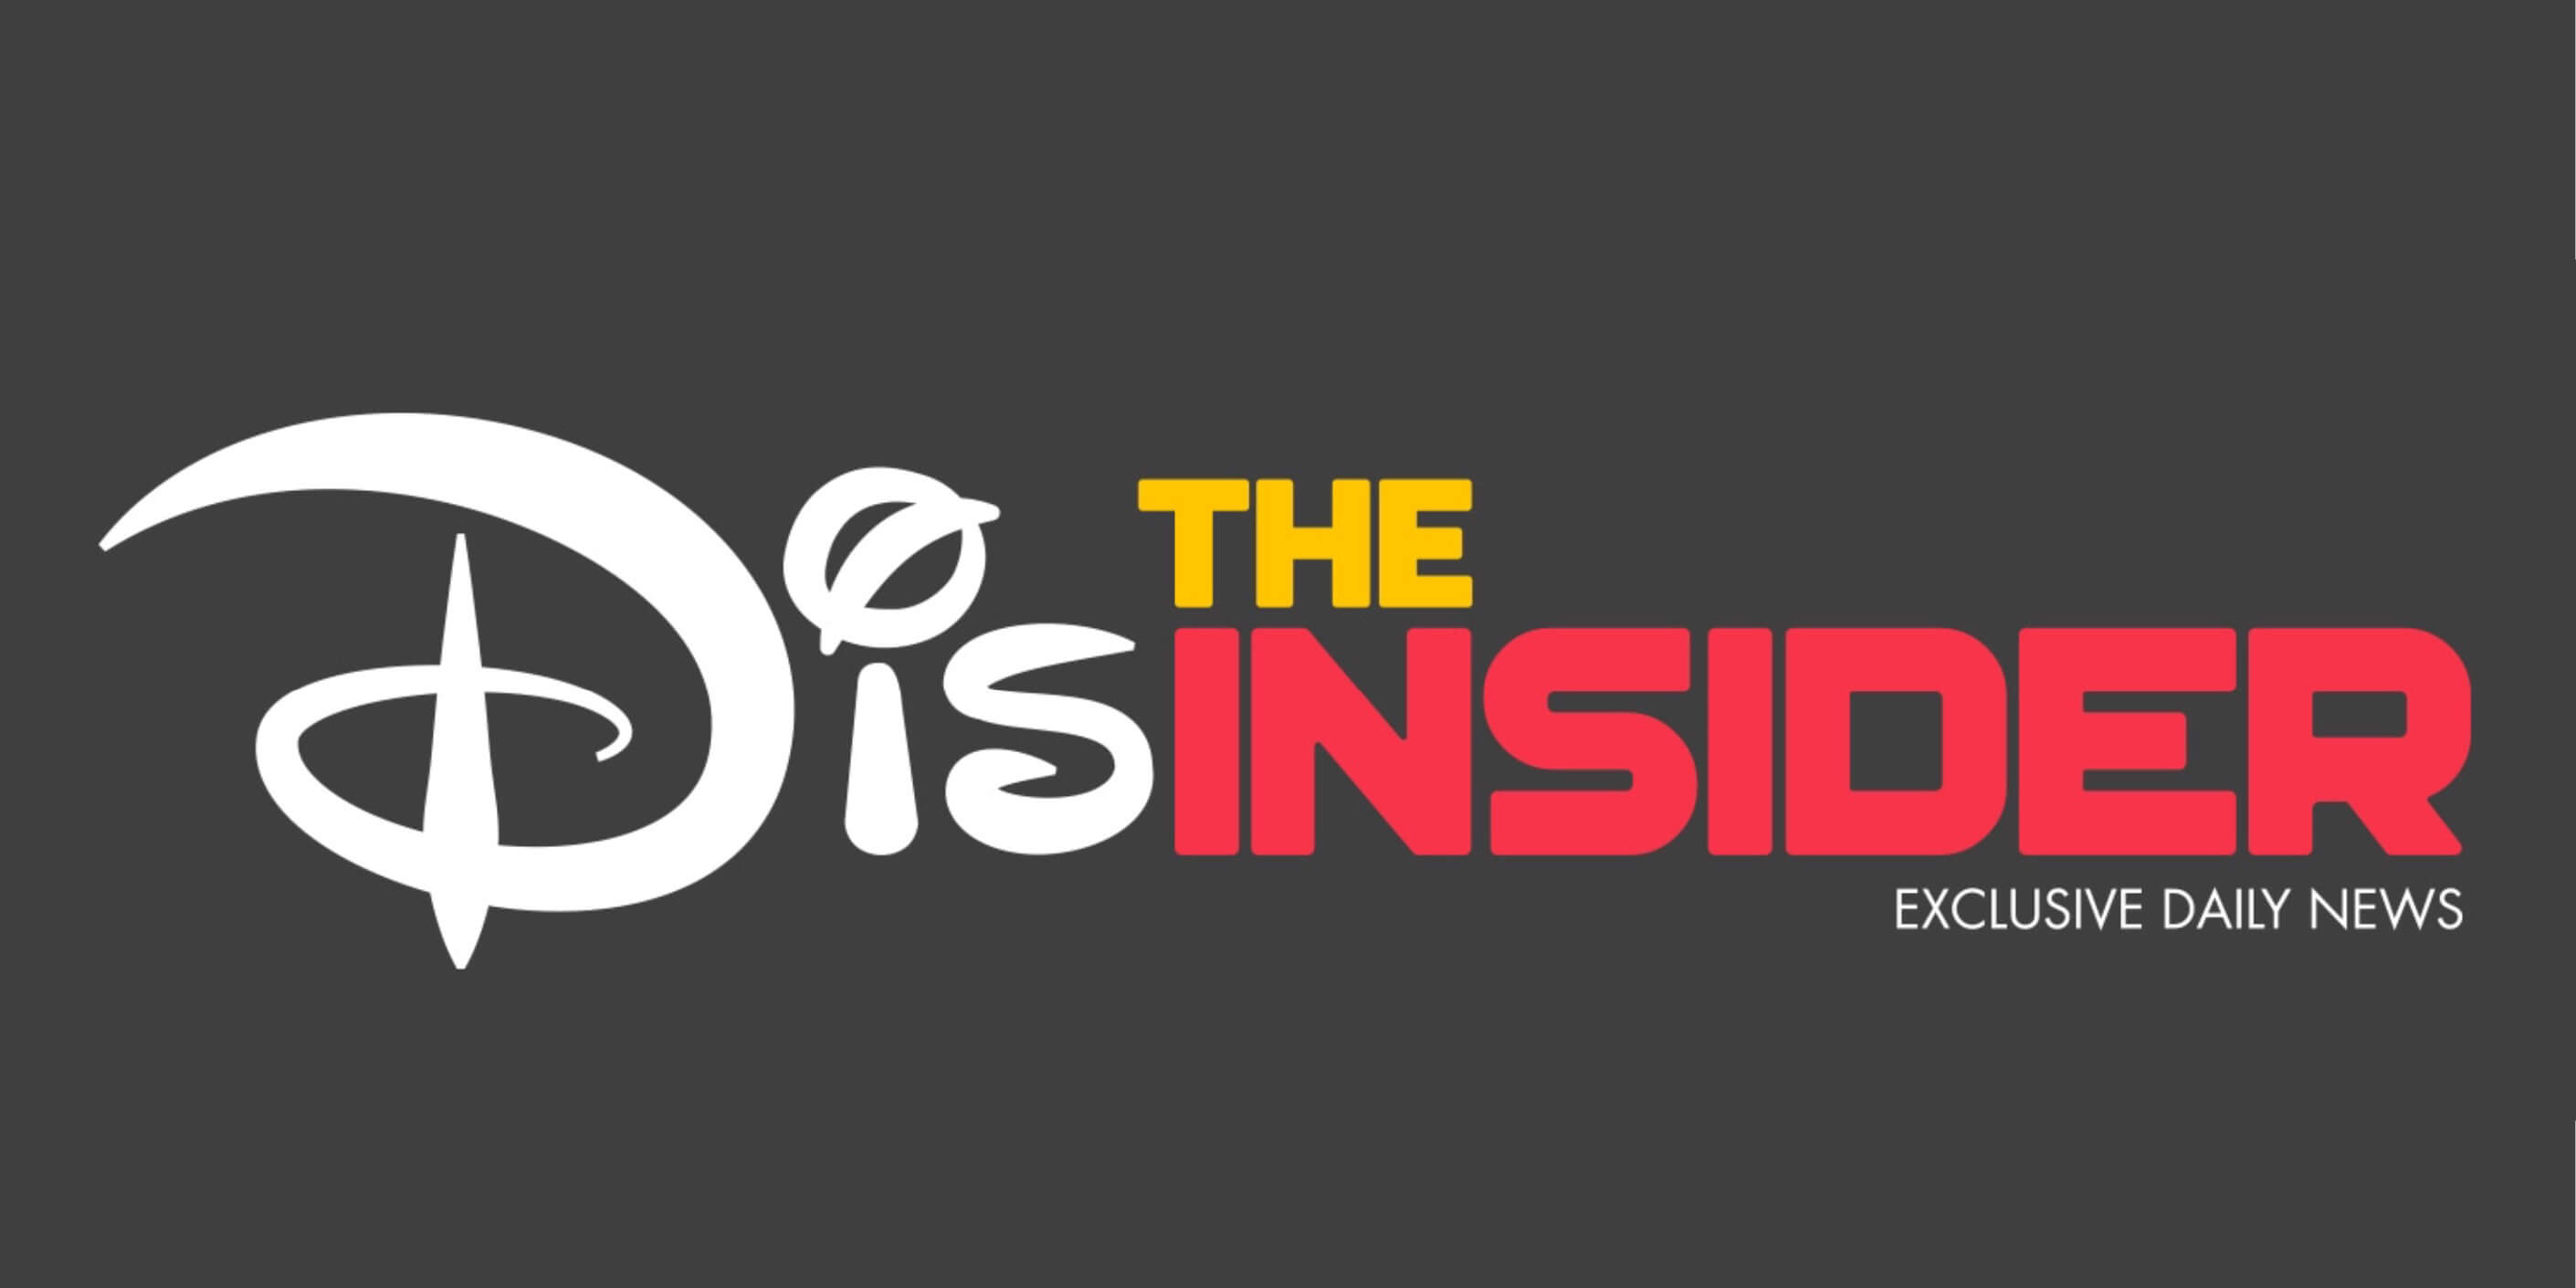 TheDisInsider.com Is Looking For Writers